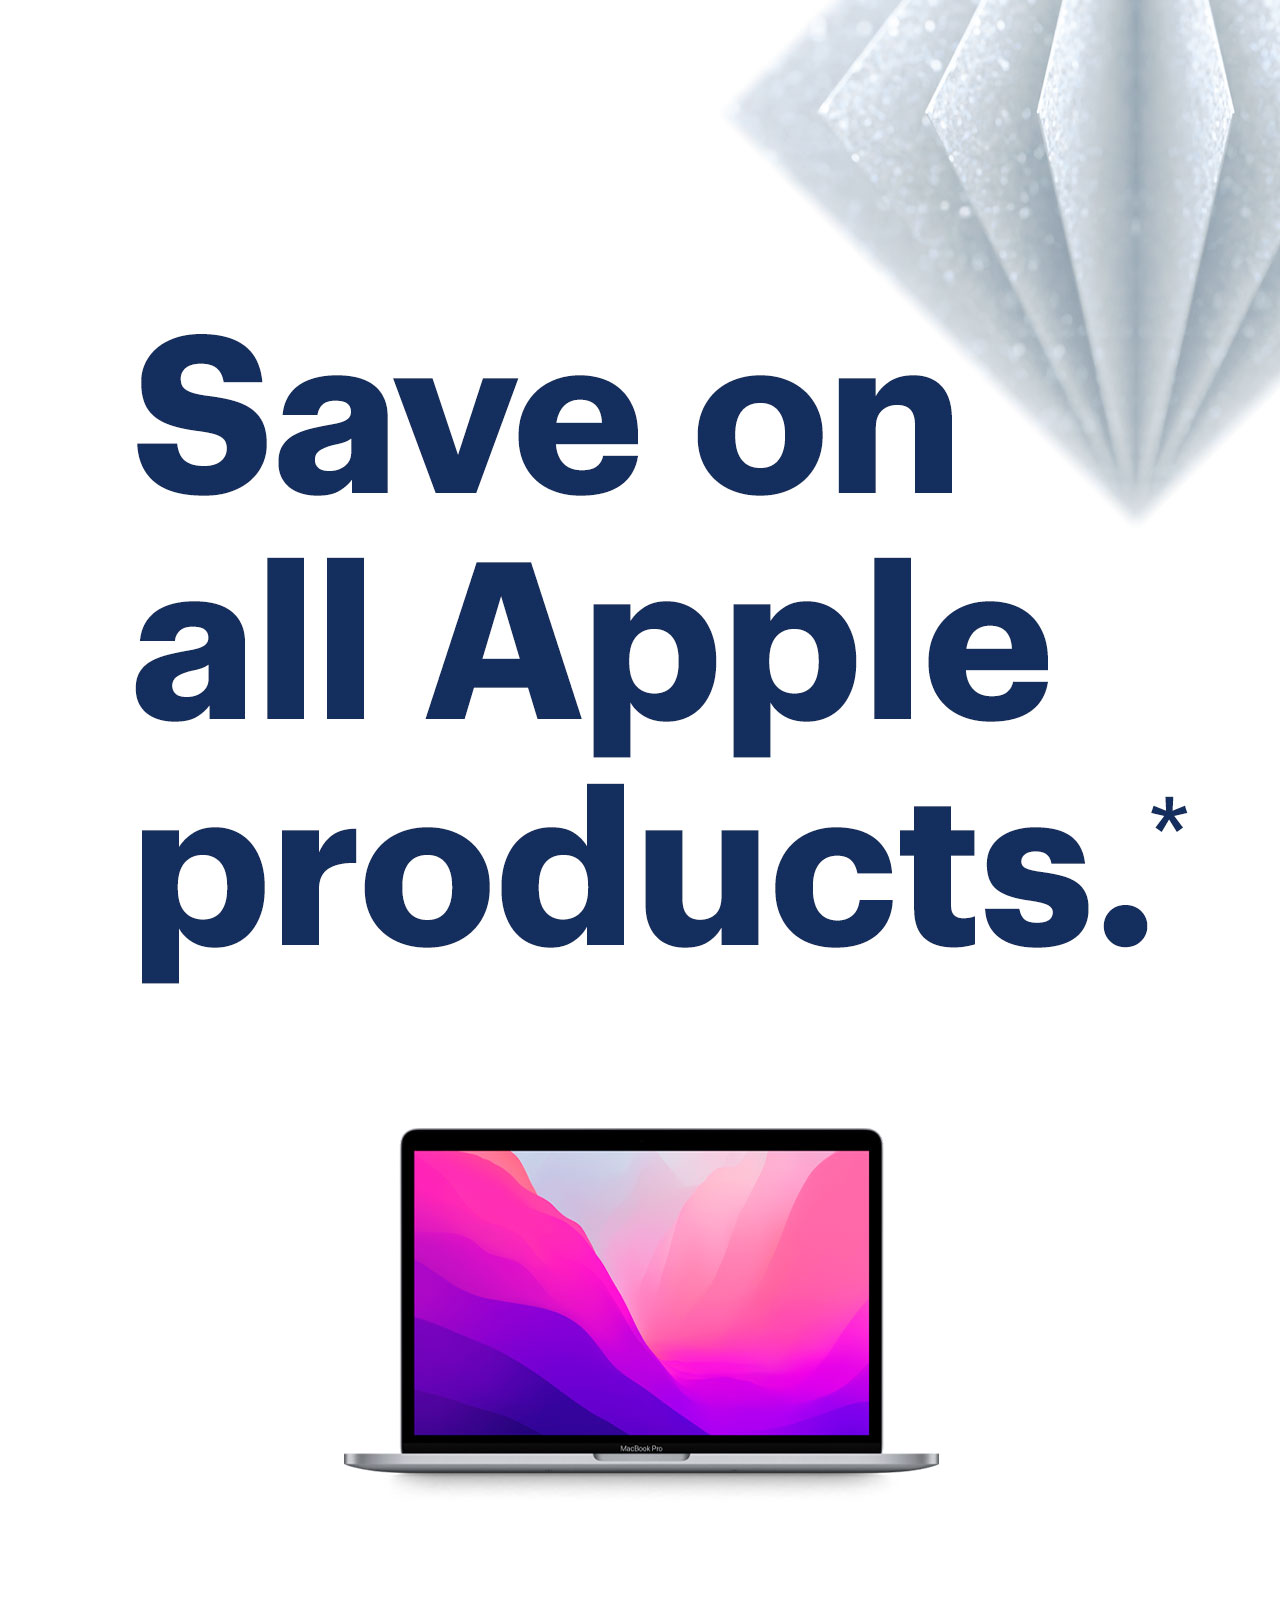 Save on all Apple products. Reference disclaimer.